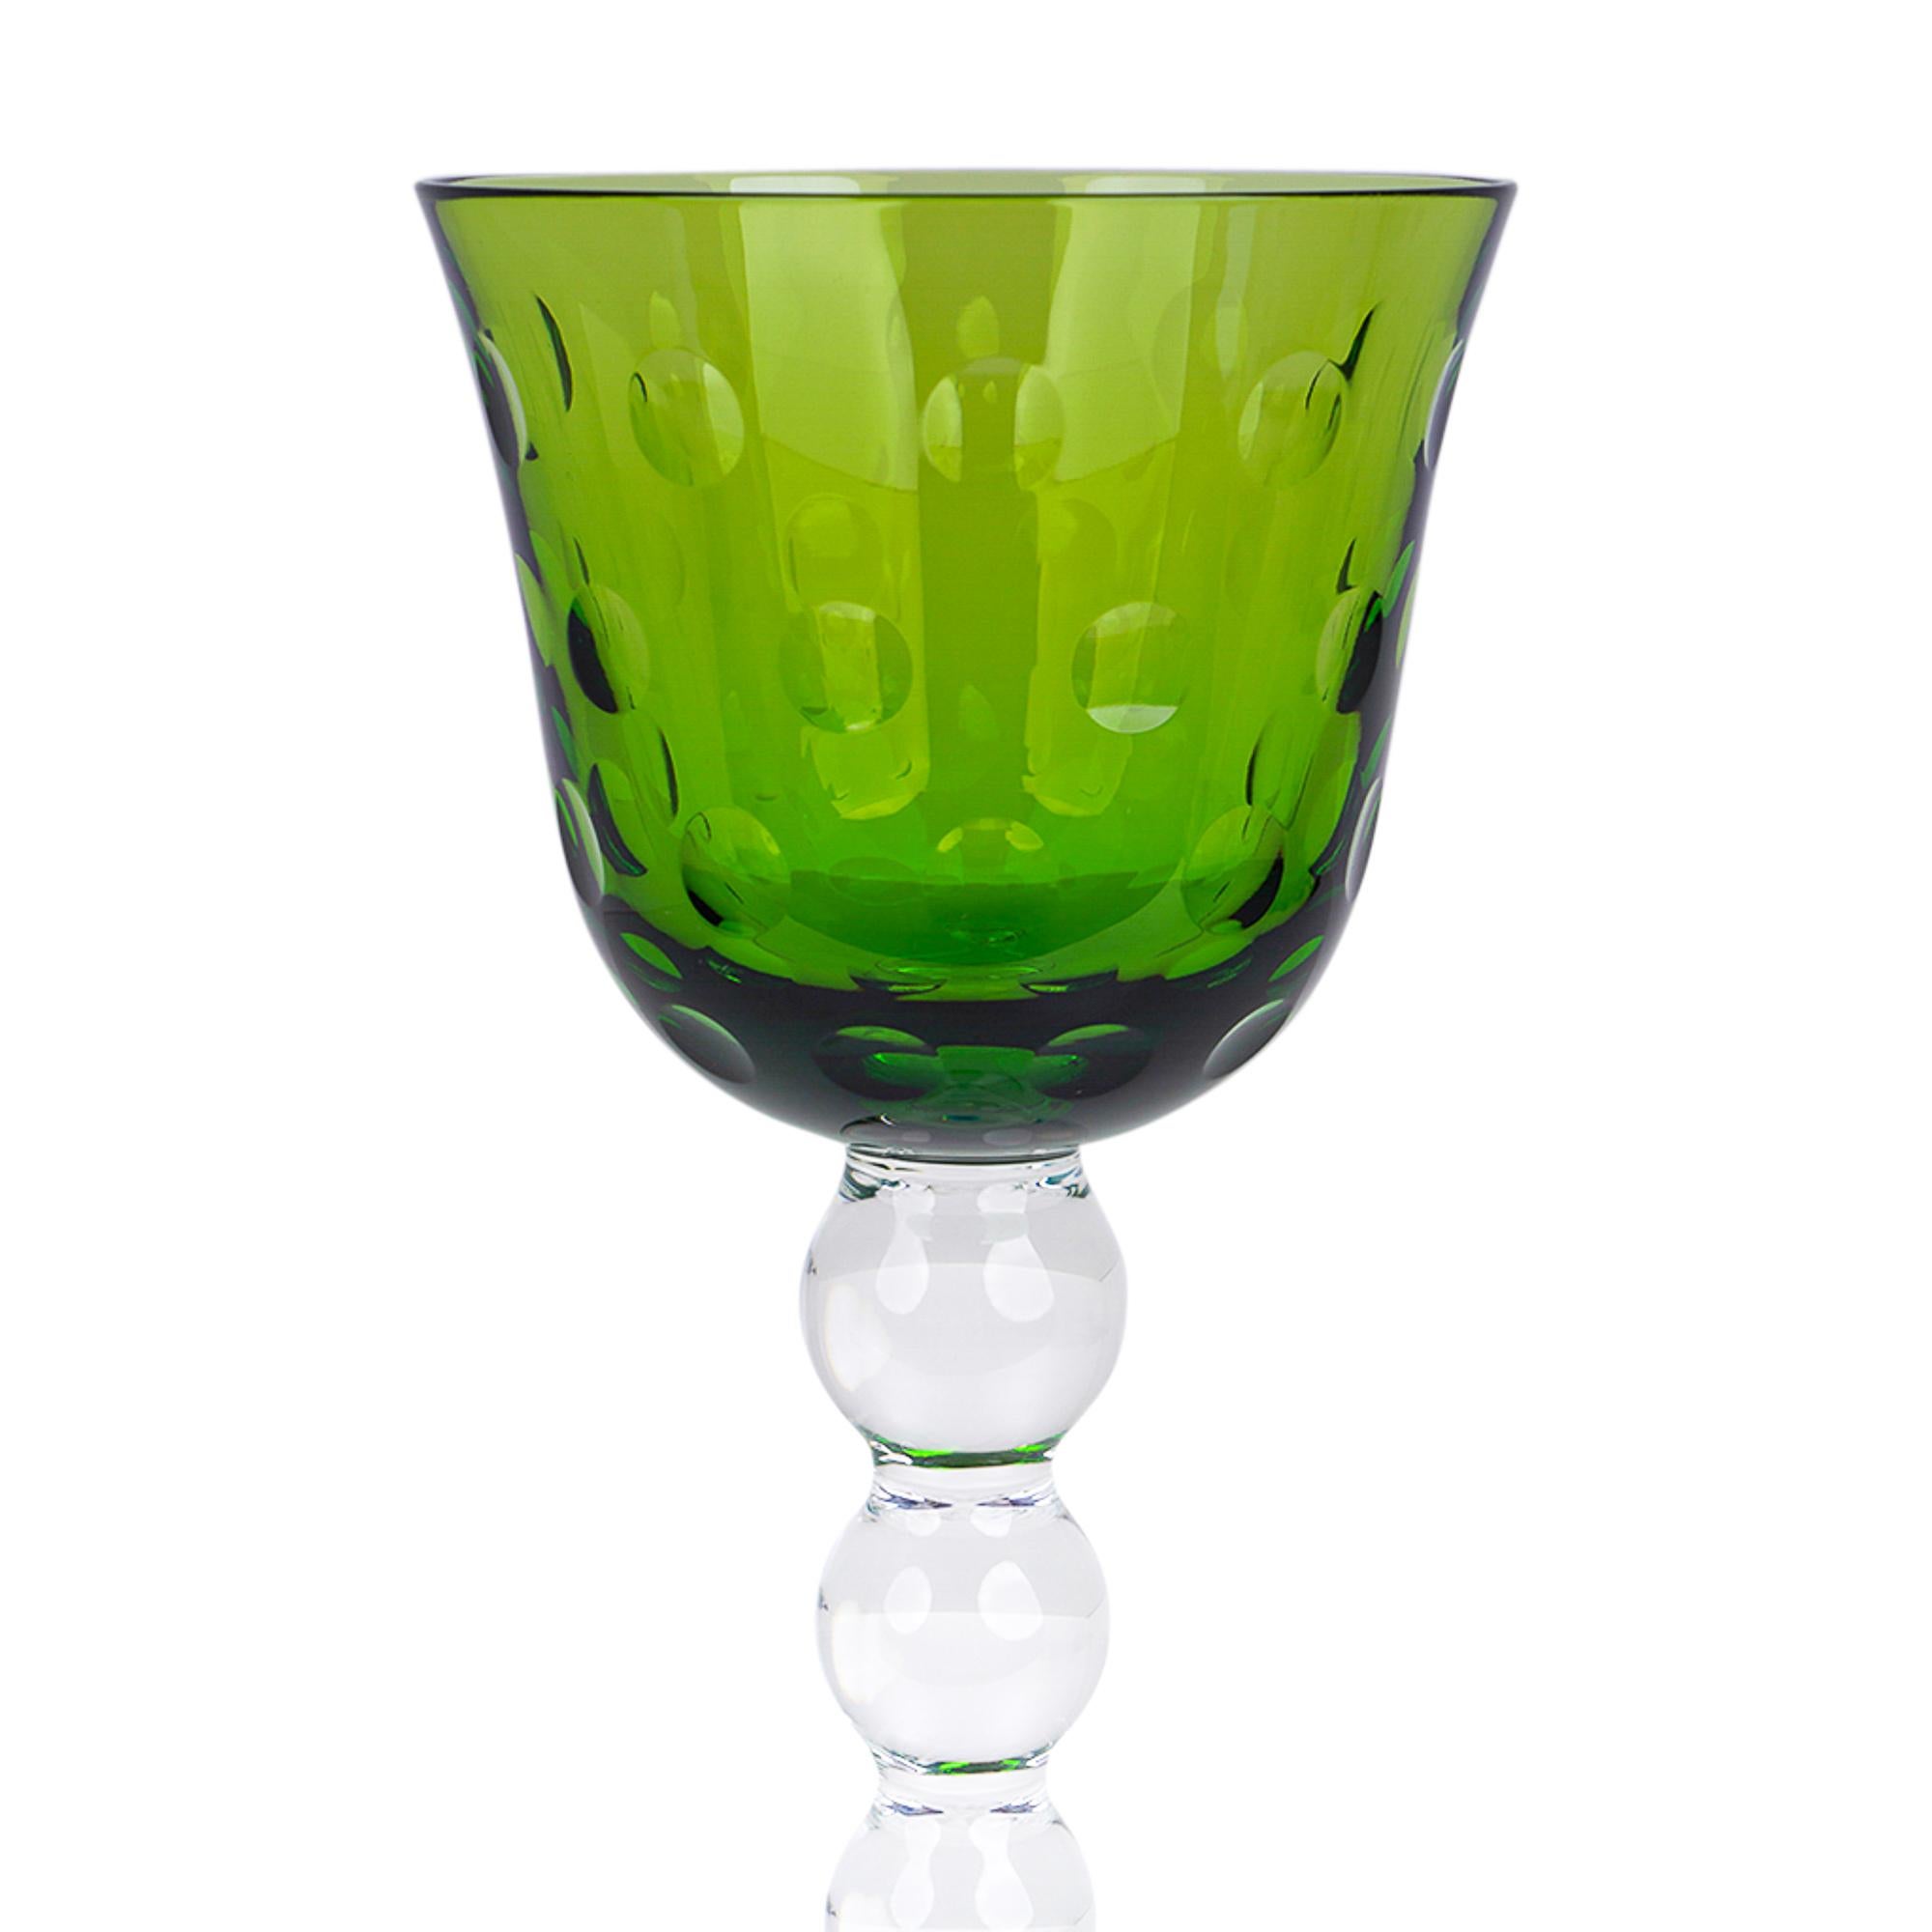 Mightychic offers Saint-Louis Bubbles Hock Wine glasses featured in Green.
Mouthblown and handcut.
Set of six handcrafted crystal glasses - each holds 3.7 oz.
Designed in 1992 by Teleri Ann Jones, the clear stems resemble a beautiful stack of